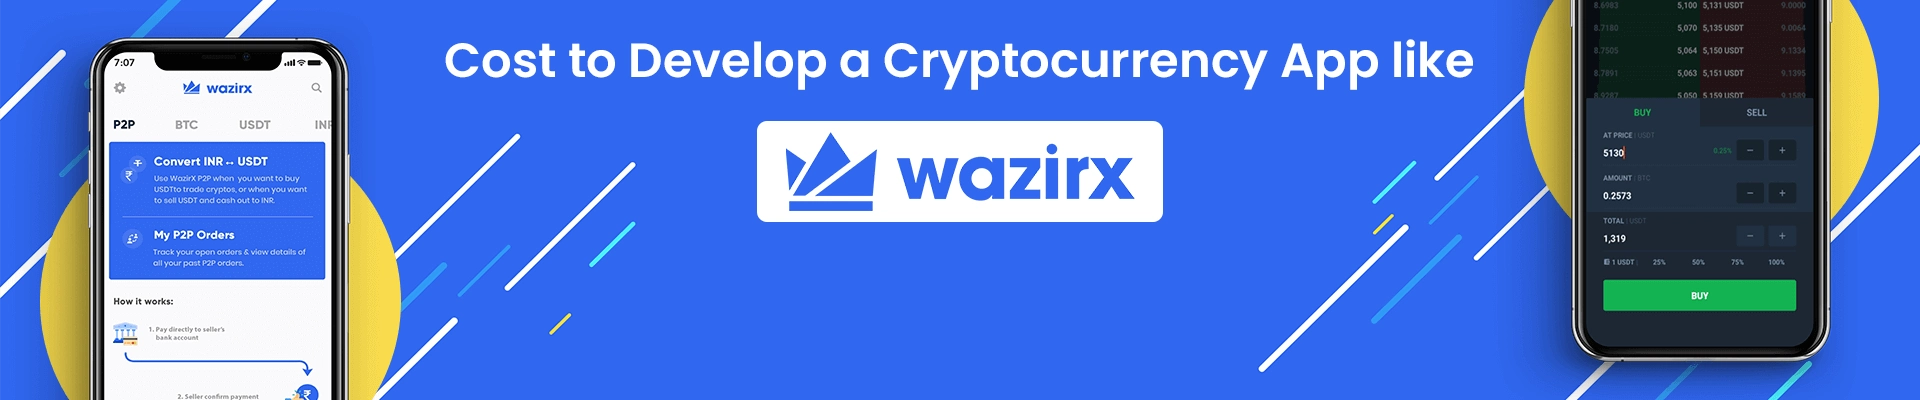 How Much Does It Cost to Develop a Cryptocurrency App like Wazirx? [2021]